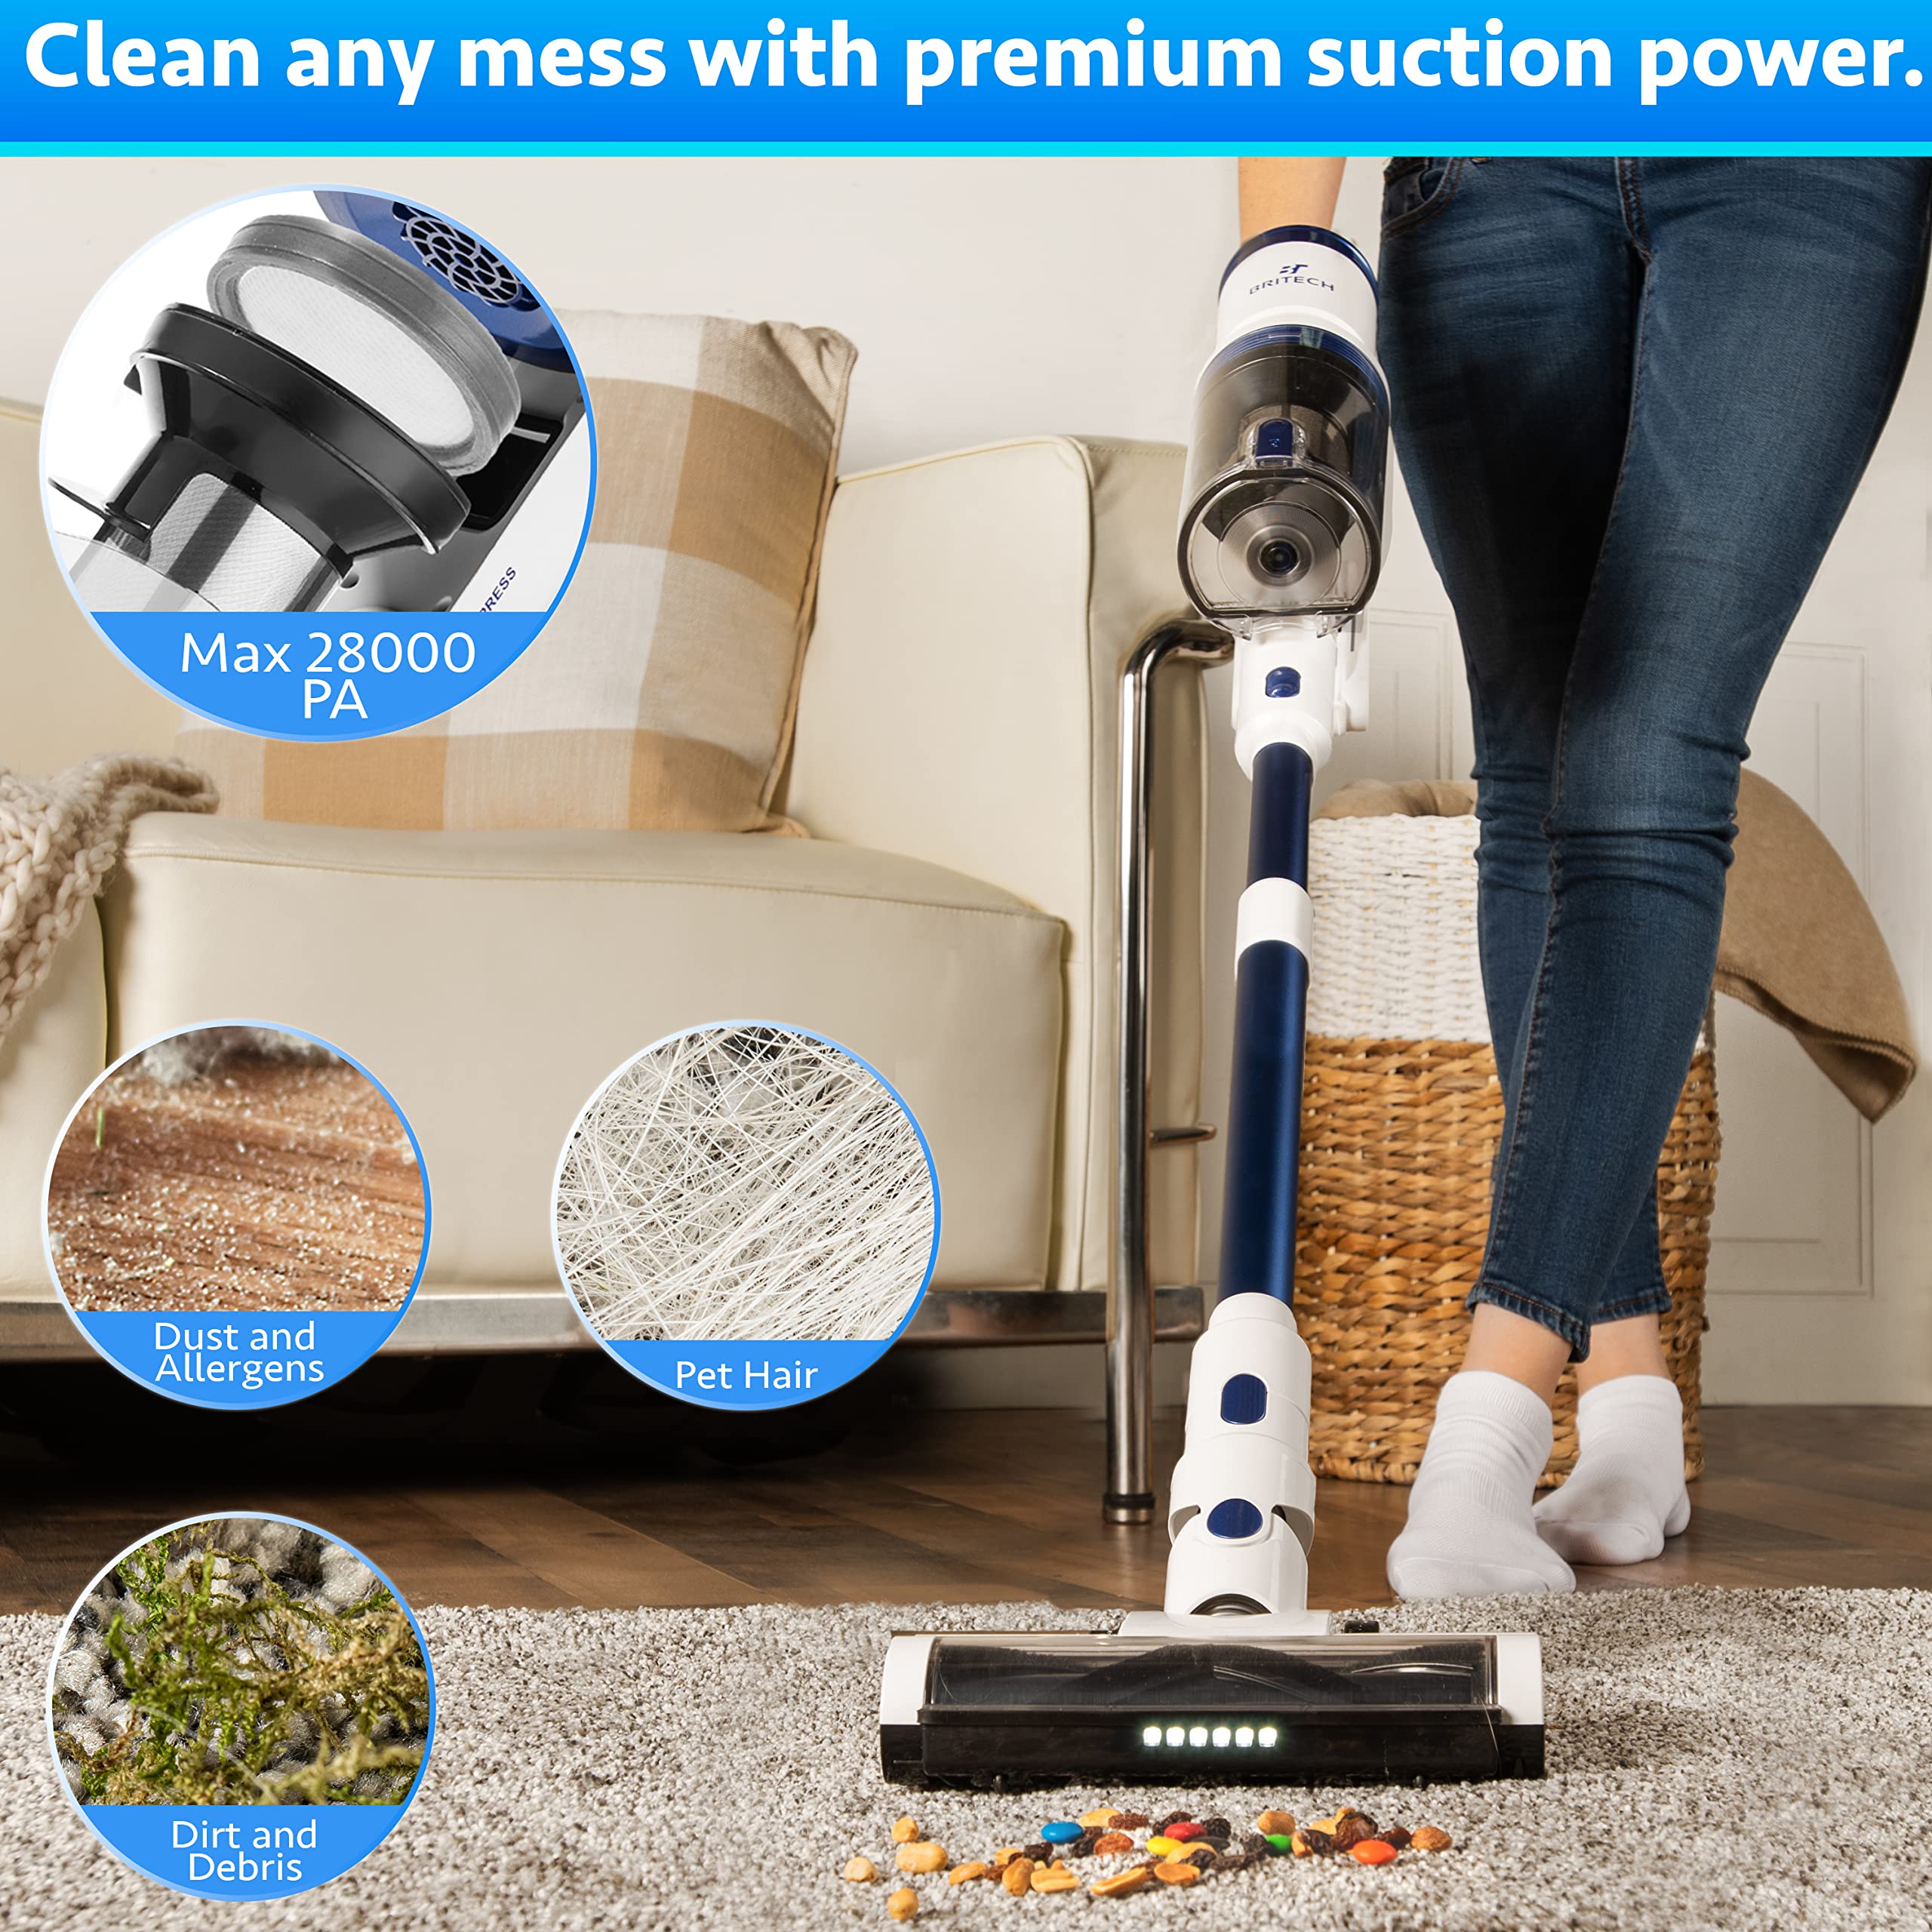 BRITECH Cordless Lightweight Stick Vacuum Cleaner, 300W Motor for Powerful Suction 40min Runtime, LED Display Screen & Headlights, Great for Carpet Cleaner, Hardwood Floor & Pet Hair (Blue)  - Like New